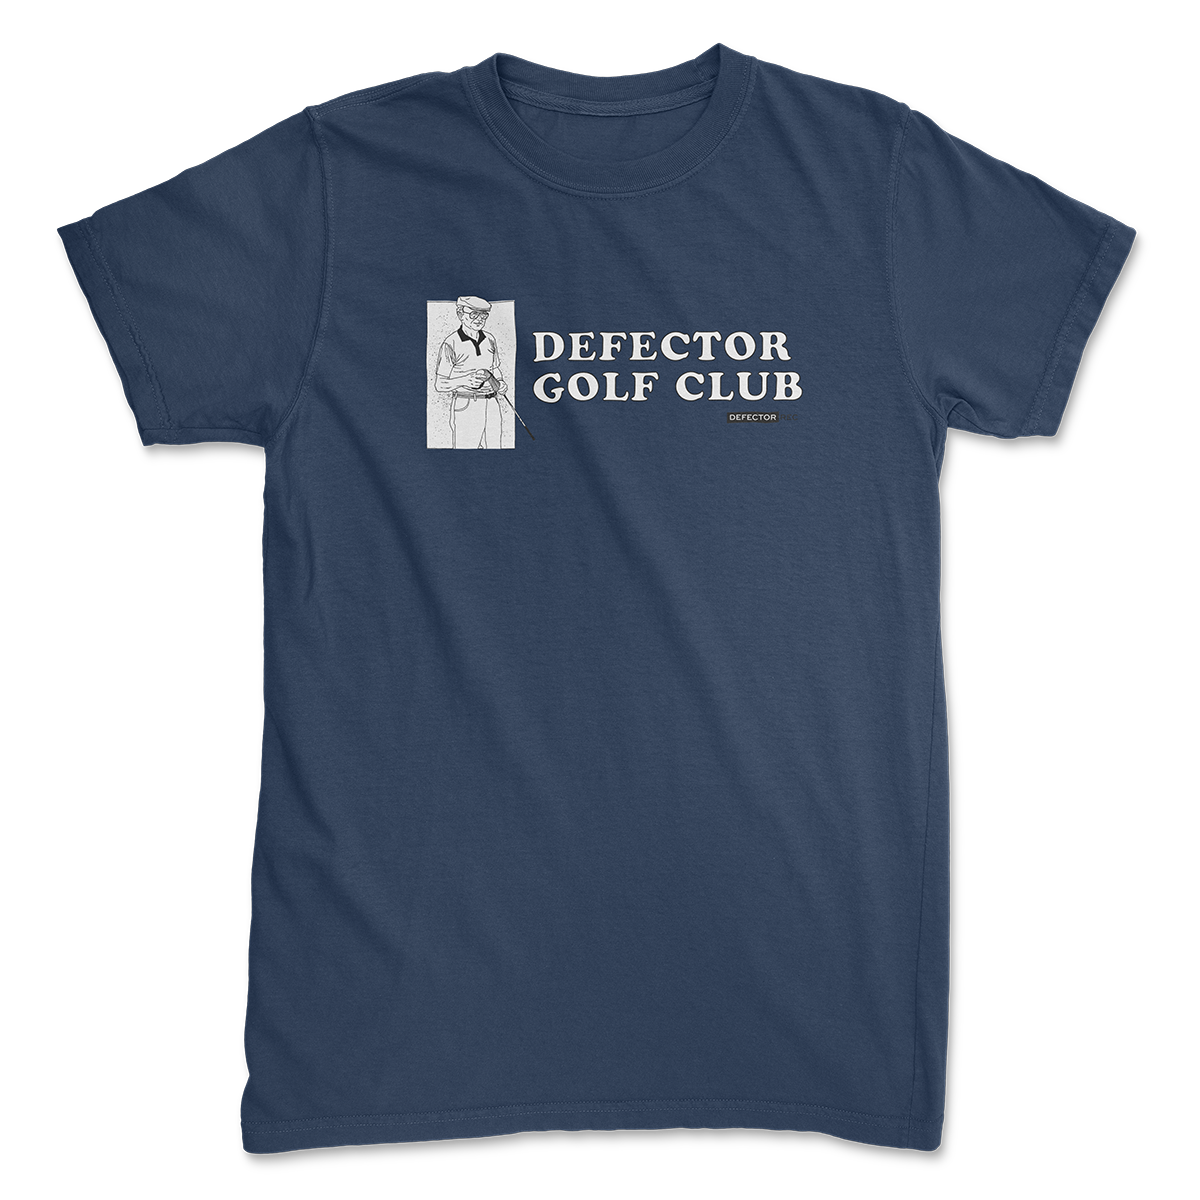 Defector Golf Club t-shirt with an old man playing golf